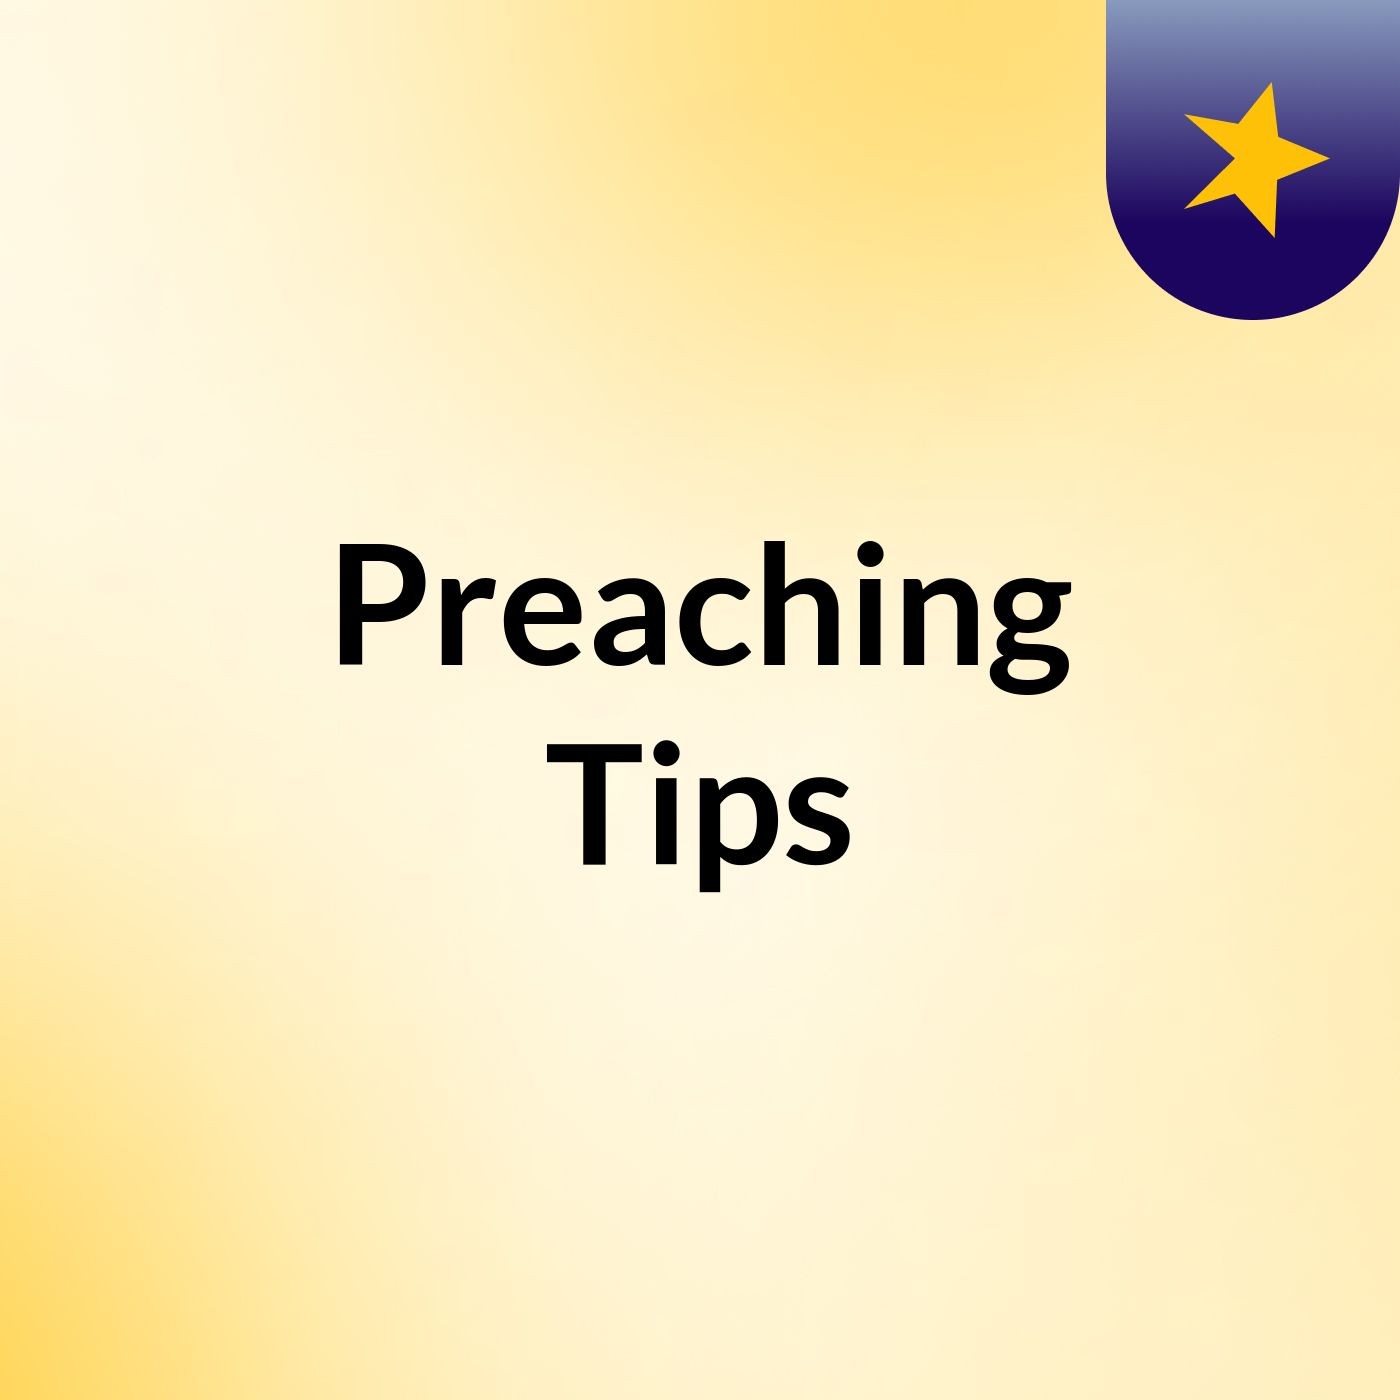 Preaching with conviction